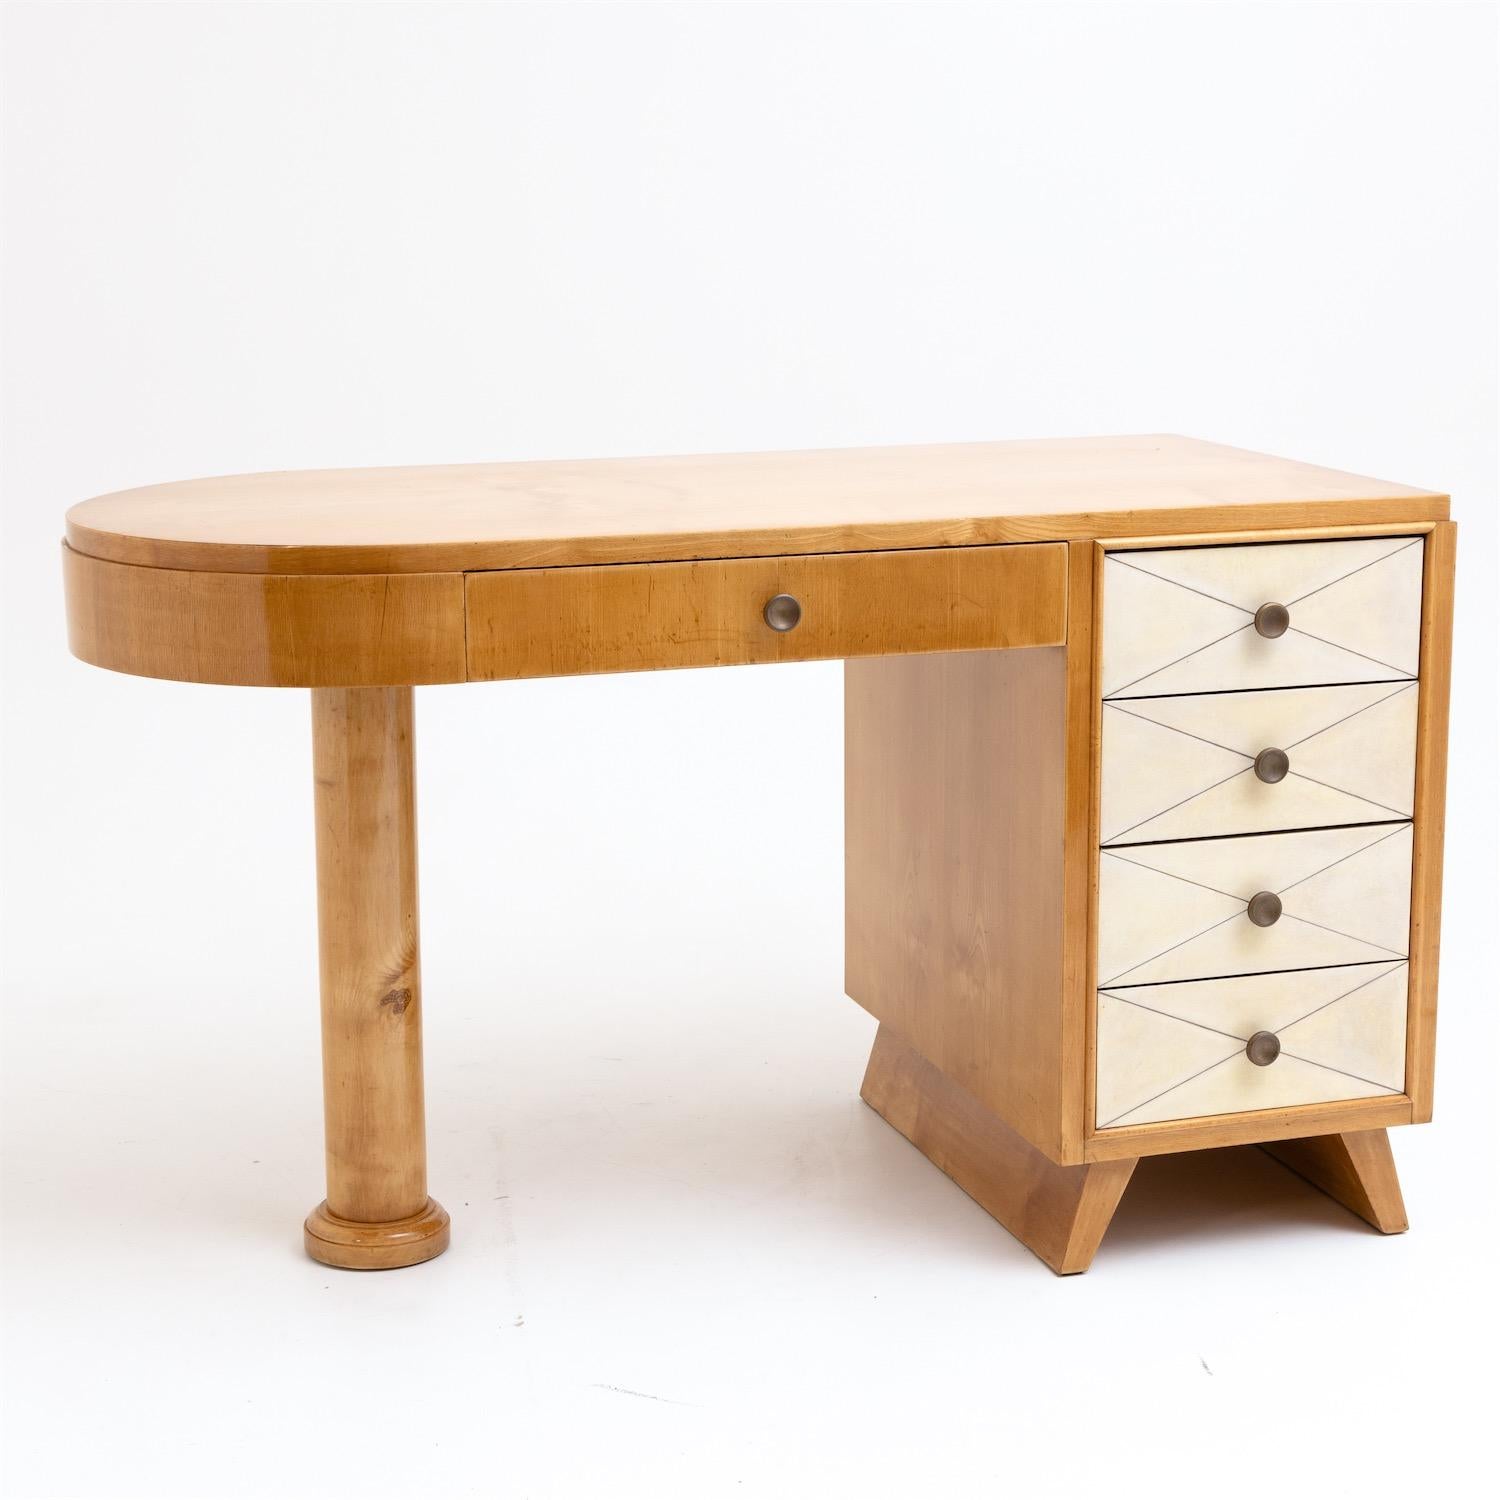 Small desk rounded at the left side and veneered in maple by Suzanne Guiguichon (1900-1985) with five drawers and columnar base. The right drawers are covered with a light-coloured parchment. The desk has been expertly restored and hand polished.